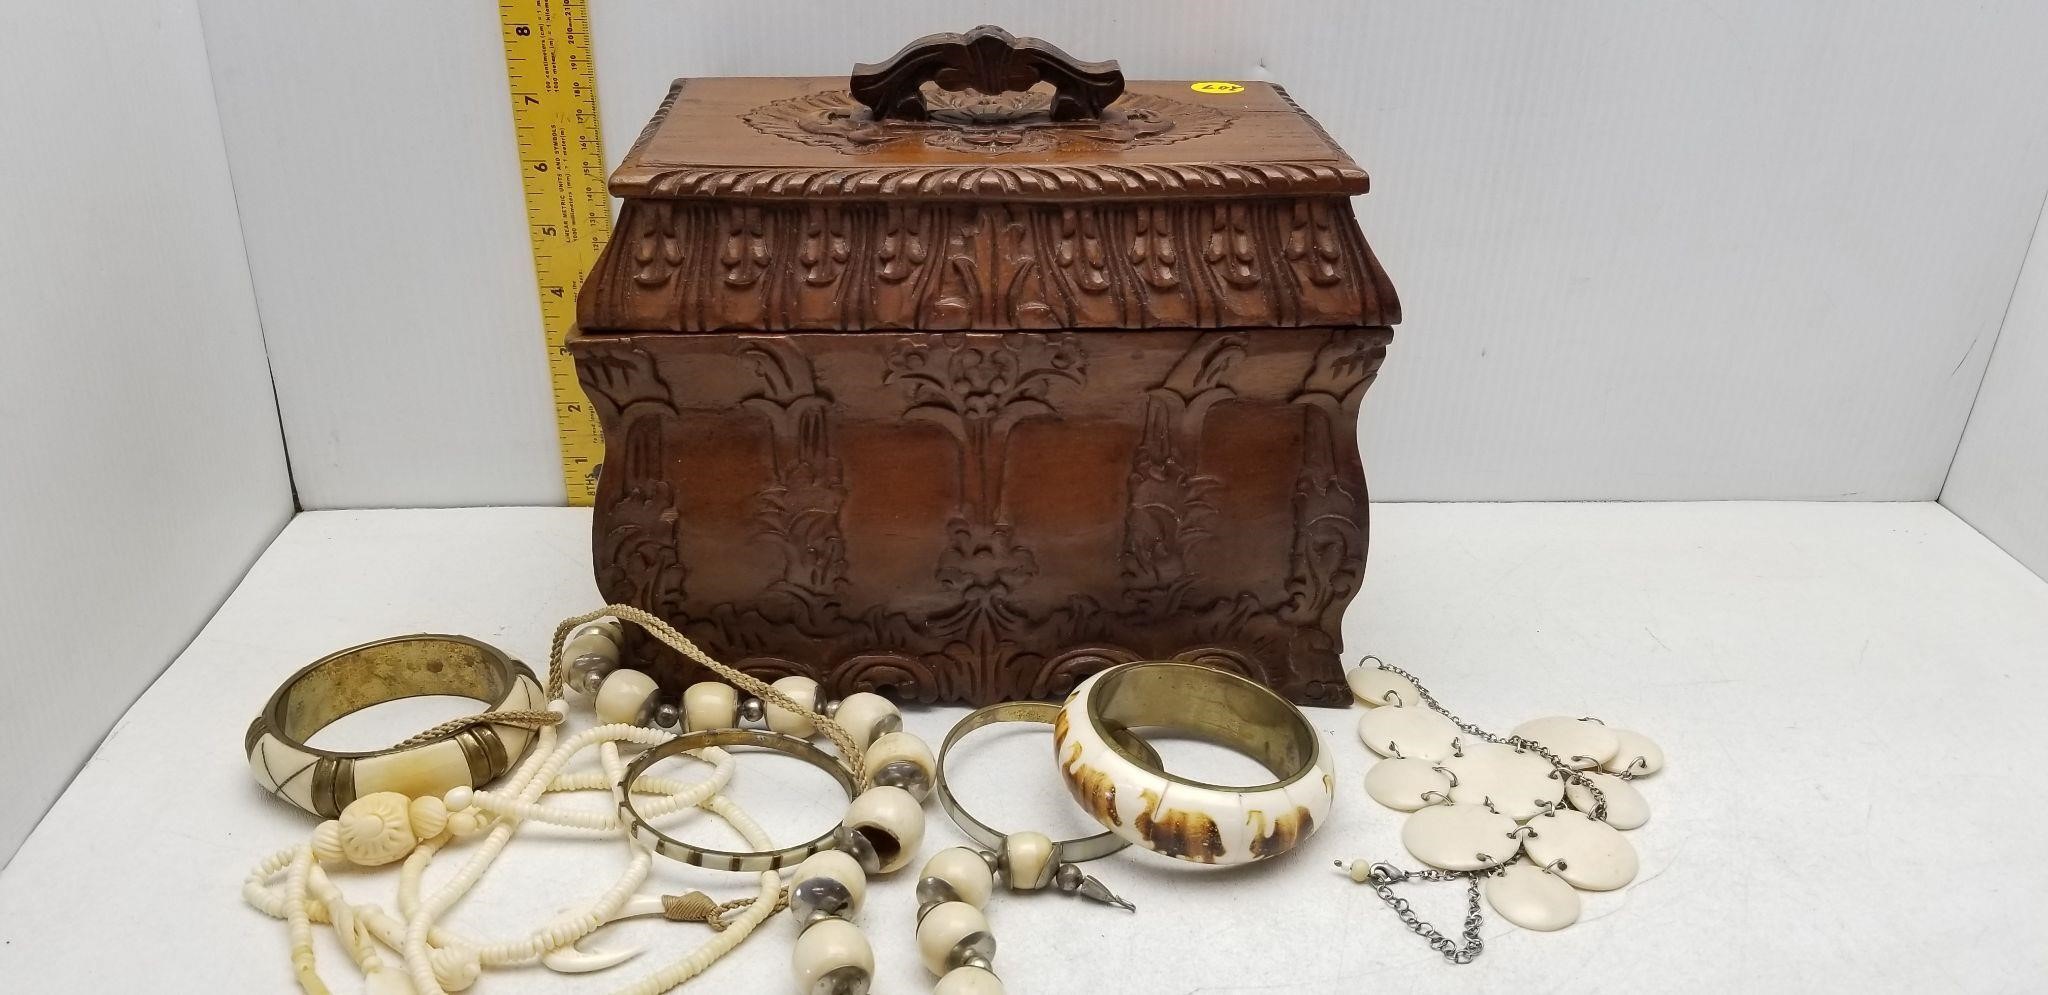 CARVED JEWELRY BOX FULL OF HAND MADE JEWELRY